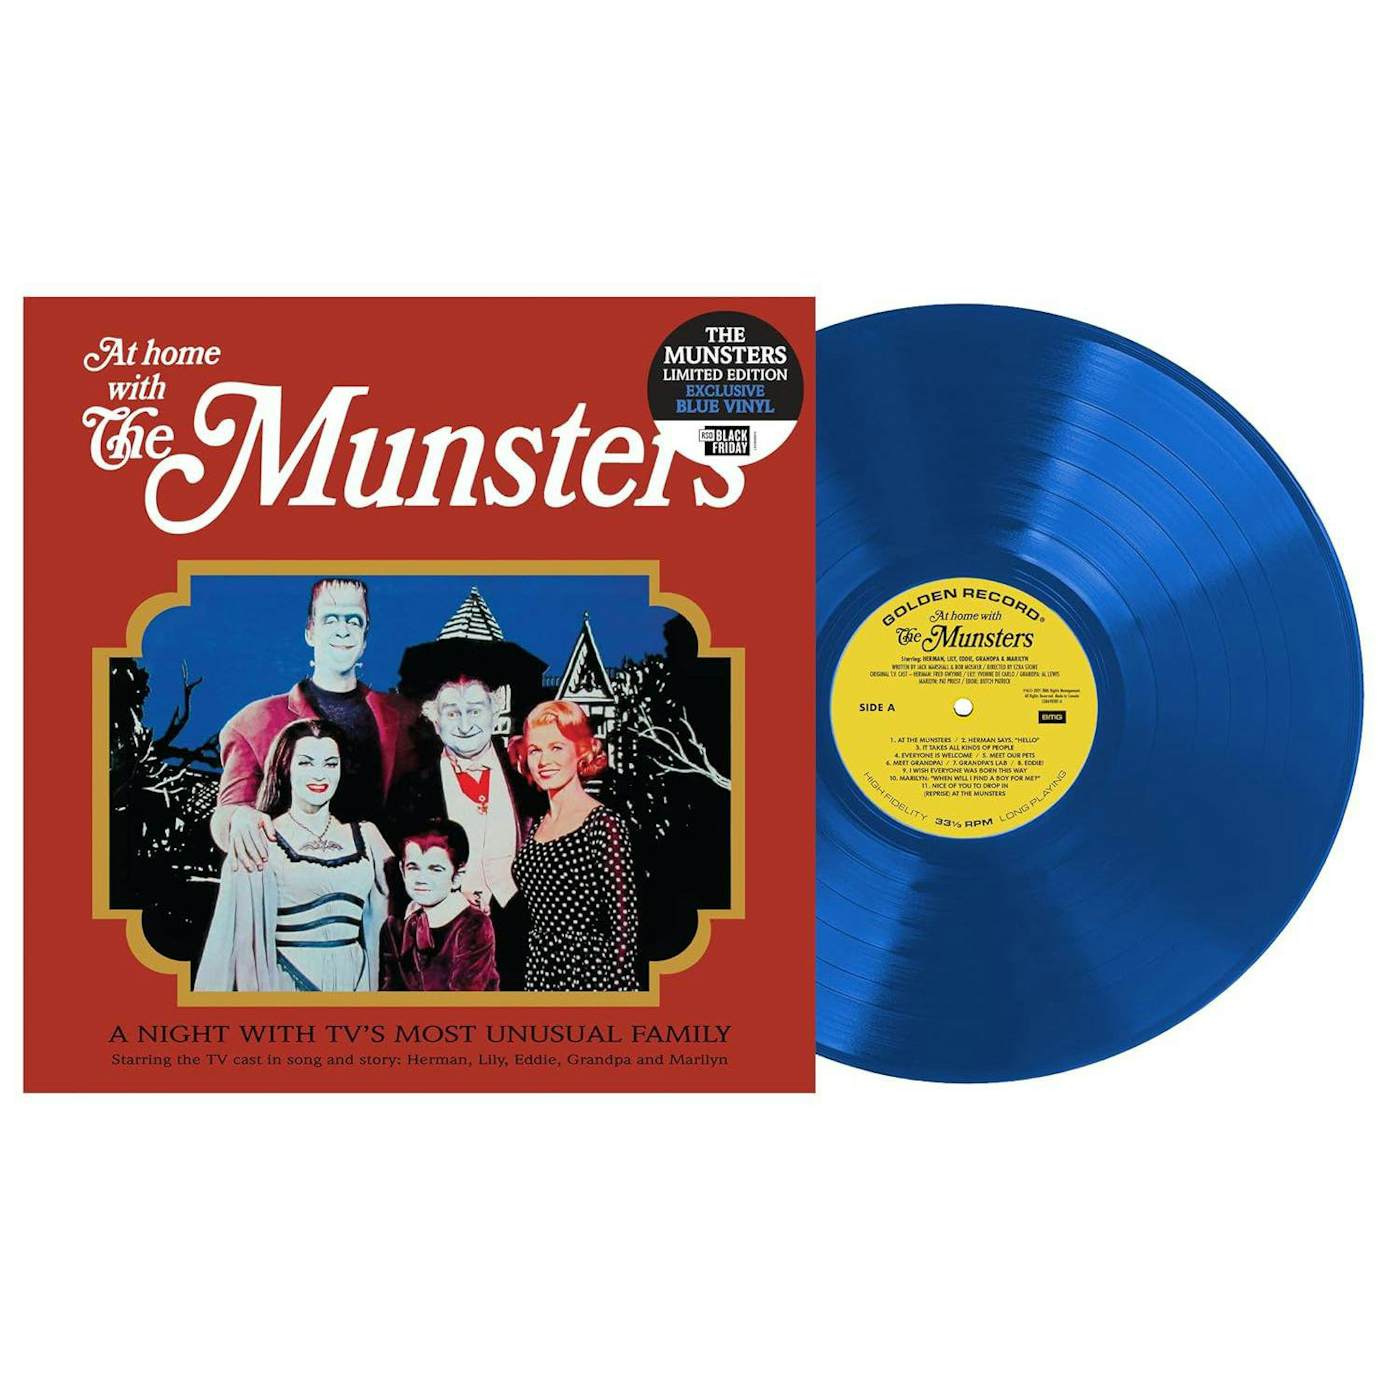 At Home With The Munsters (Blue) Vinyl Record